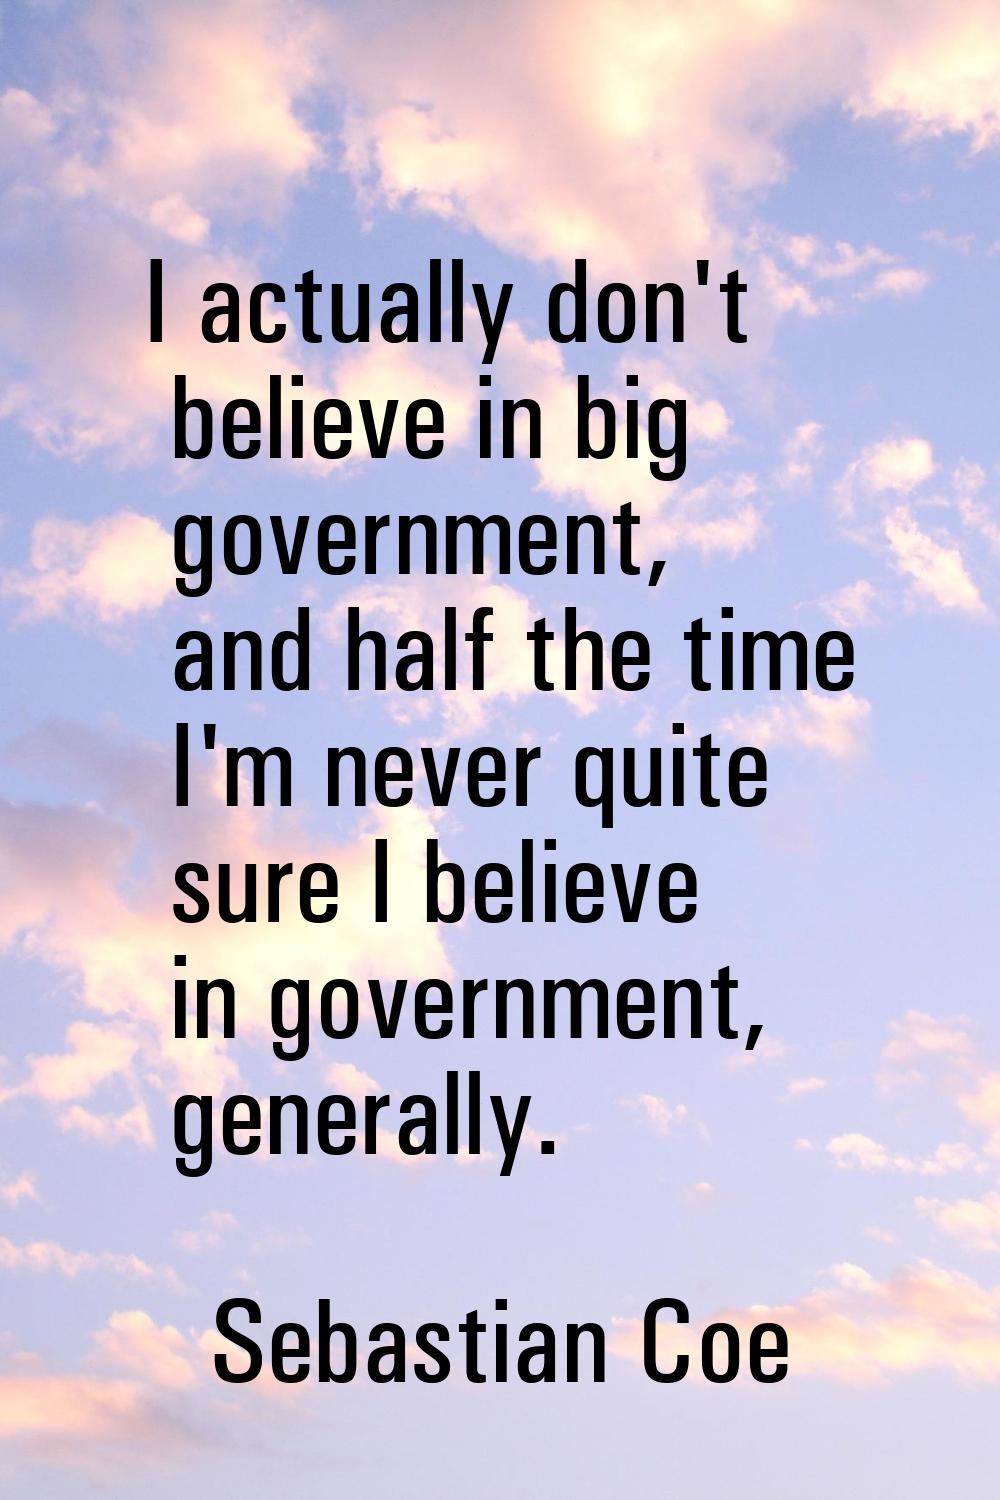 I actually don't believe in big government, and half the time I'm never quite sure I believe in gov